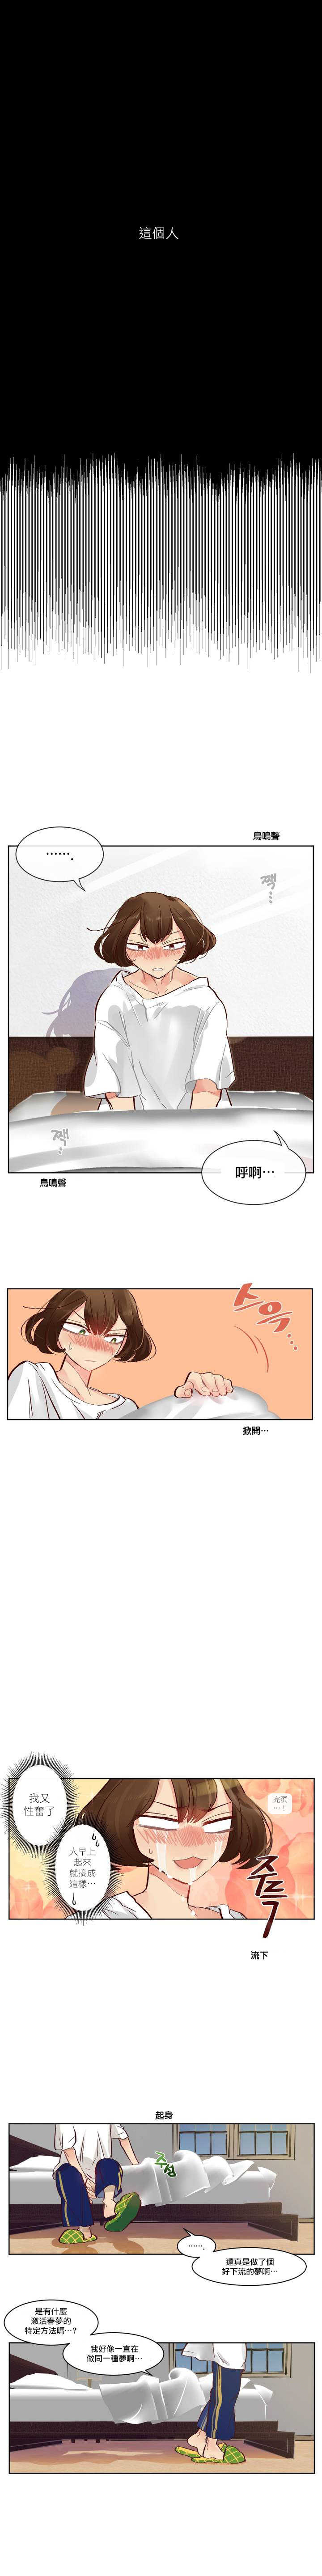 [Nanao Grey] Devil Drop | 天降惡魔 [Chinese] [沒有漢化] [Ongoing] - Page 5